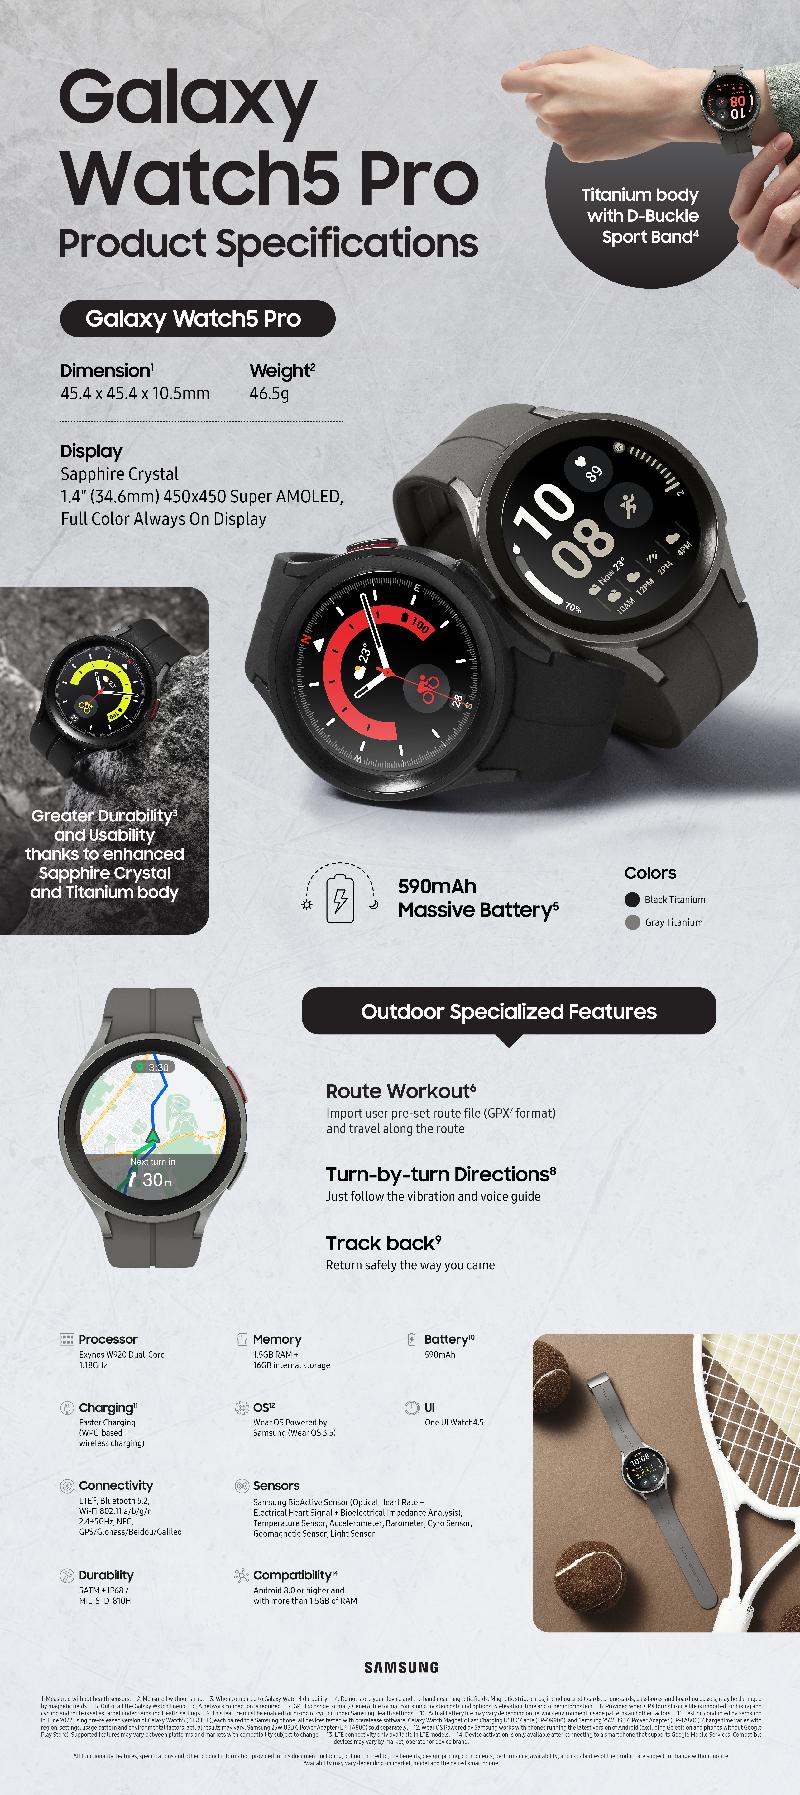 Galaxy_Watch5_Pro_Product Specifications.jpg